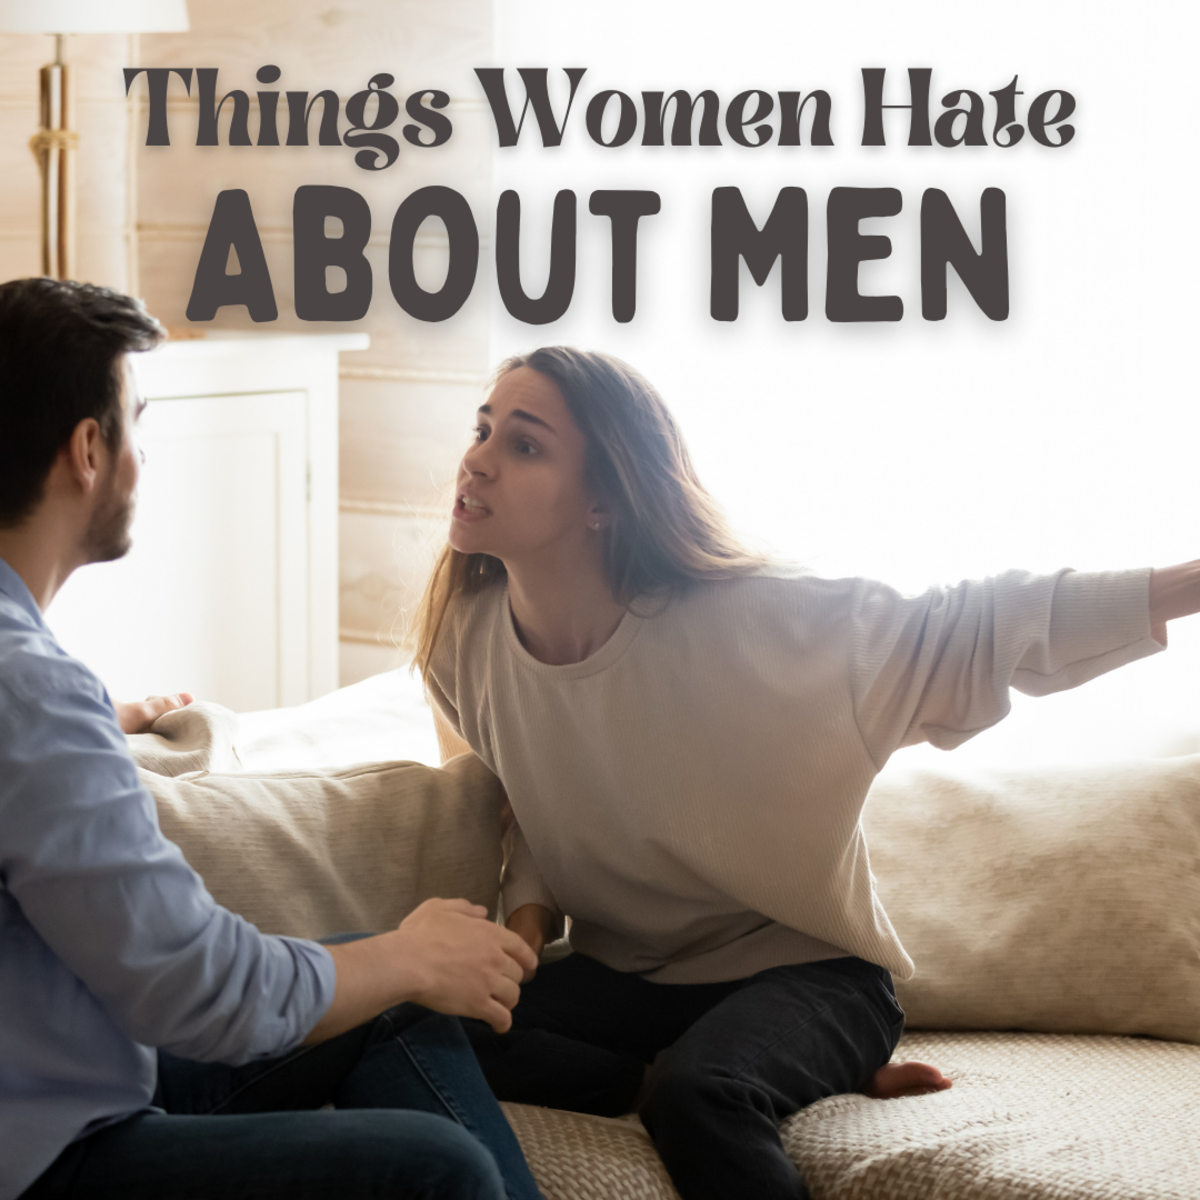 What Women Hate About Men: 15 Bad Habits and Behaviors